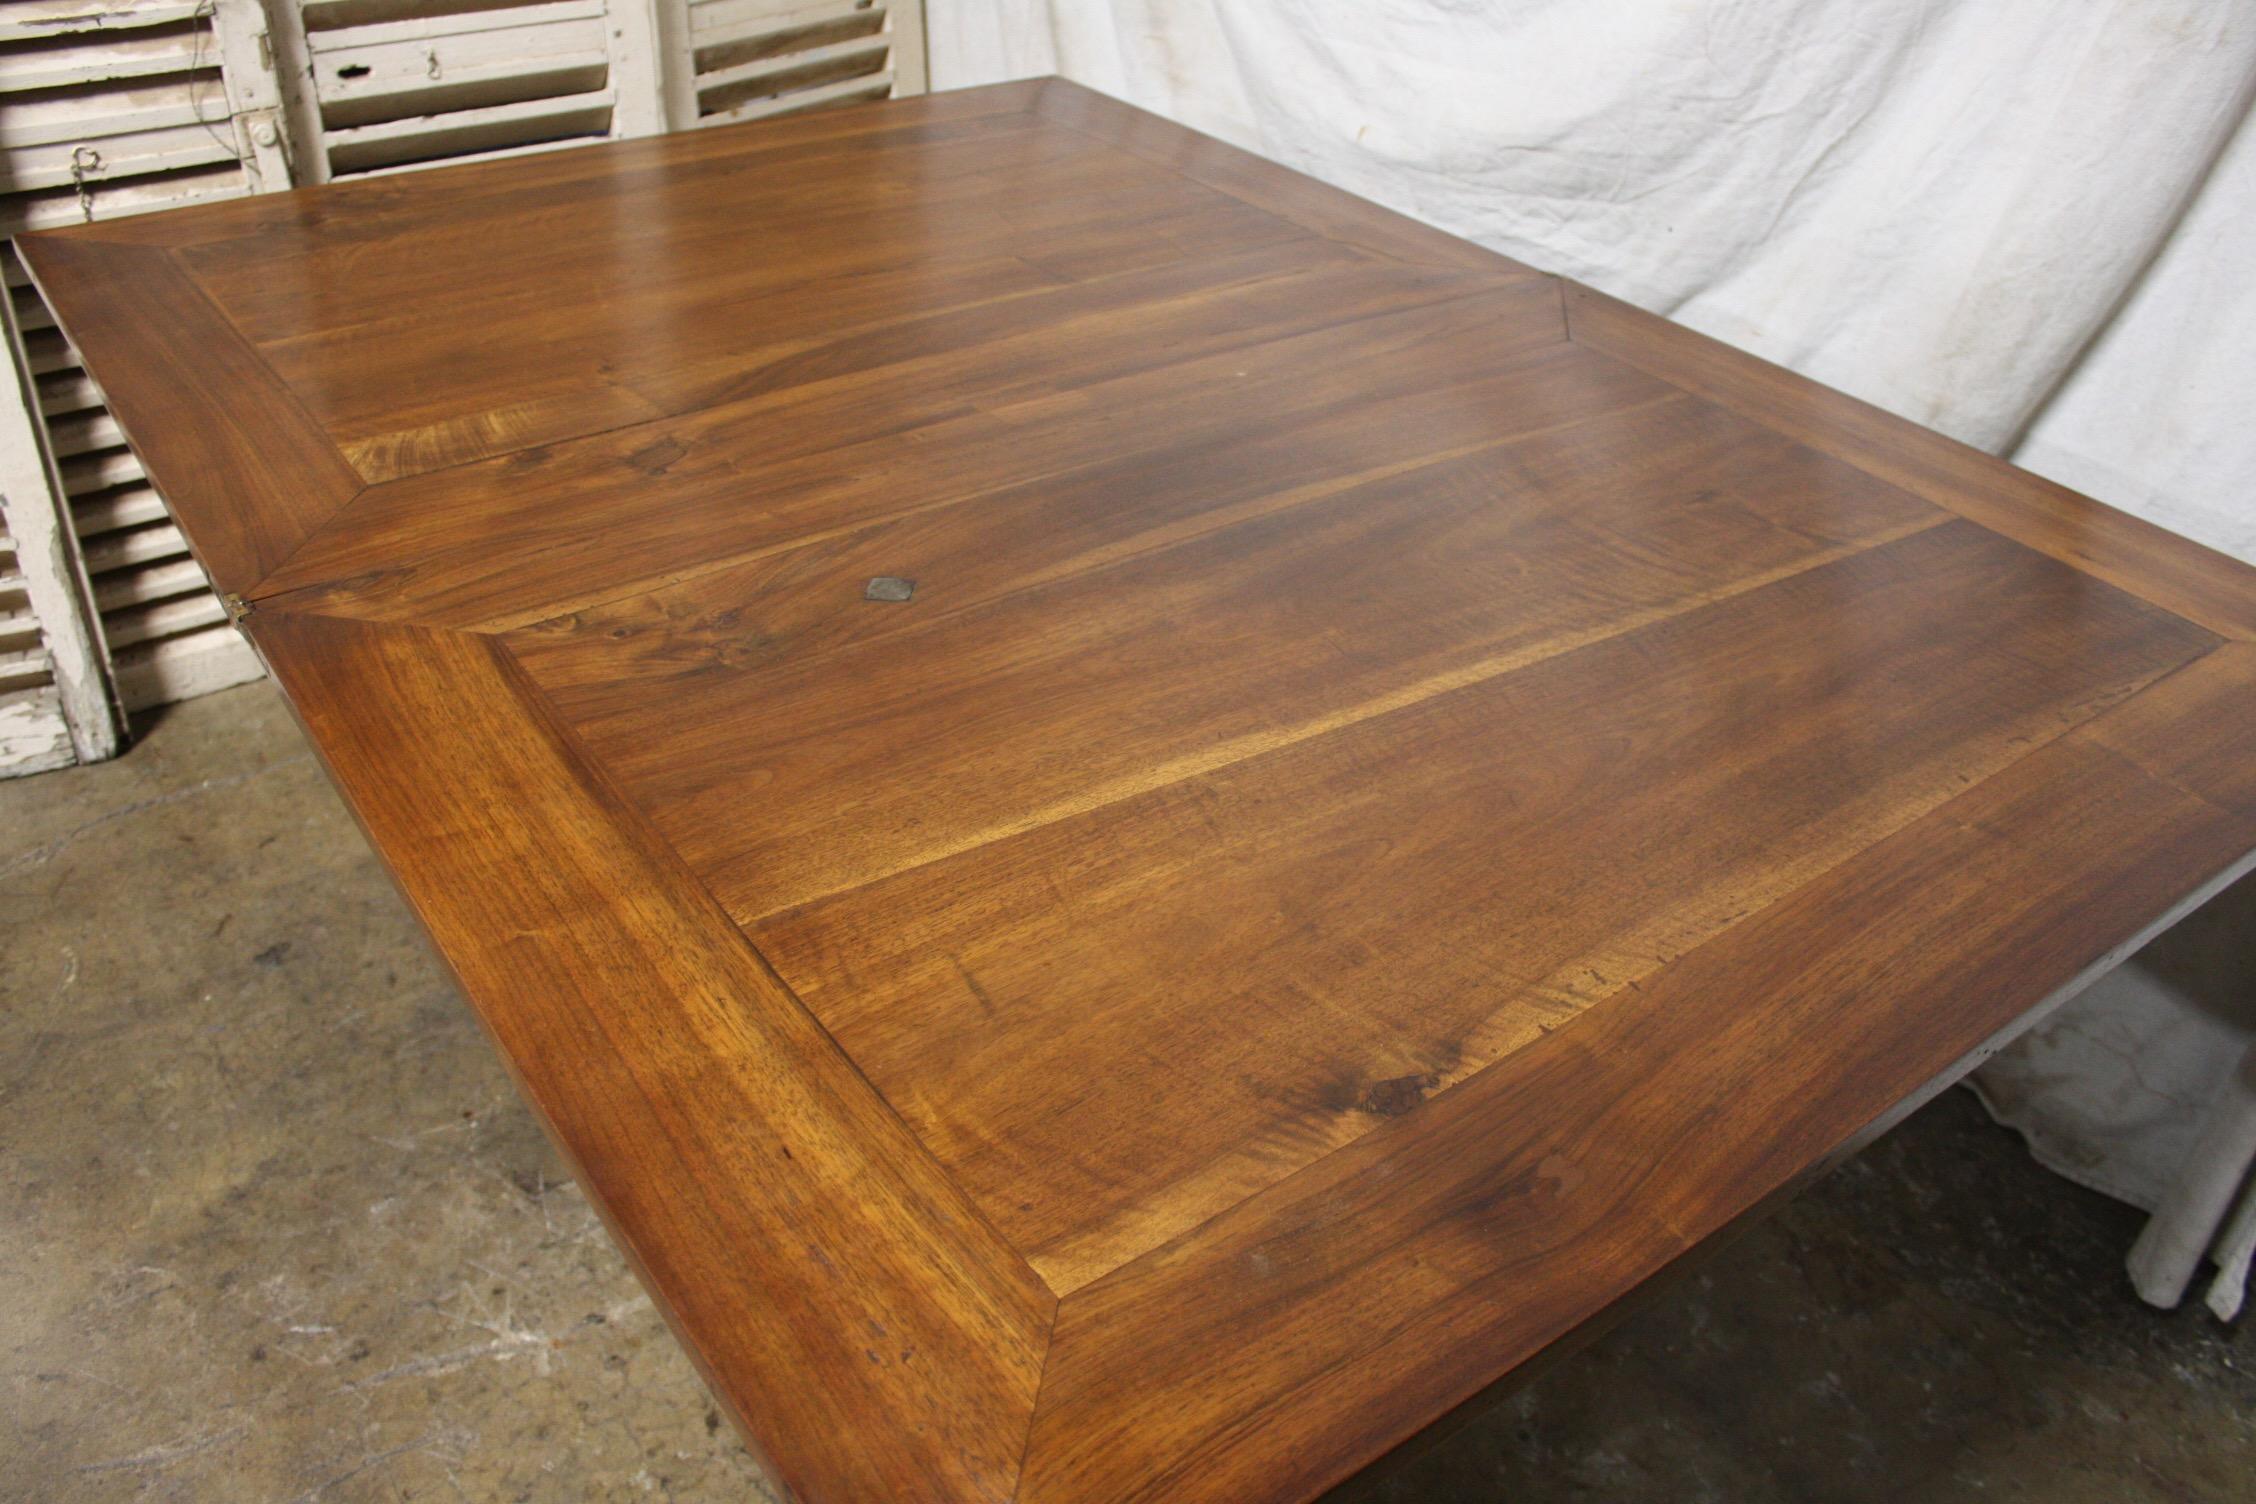 Very interesting table that can be fold when you dont need it as a big size with a storage under the top to put the napkins eventually. Beautiful walnut wood with castors at the feet.
Dimensions when the table is closed 45.75''W x 32.5''D x 30''H.